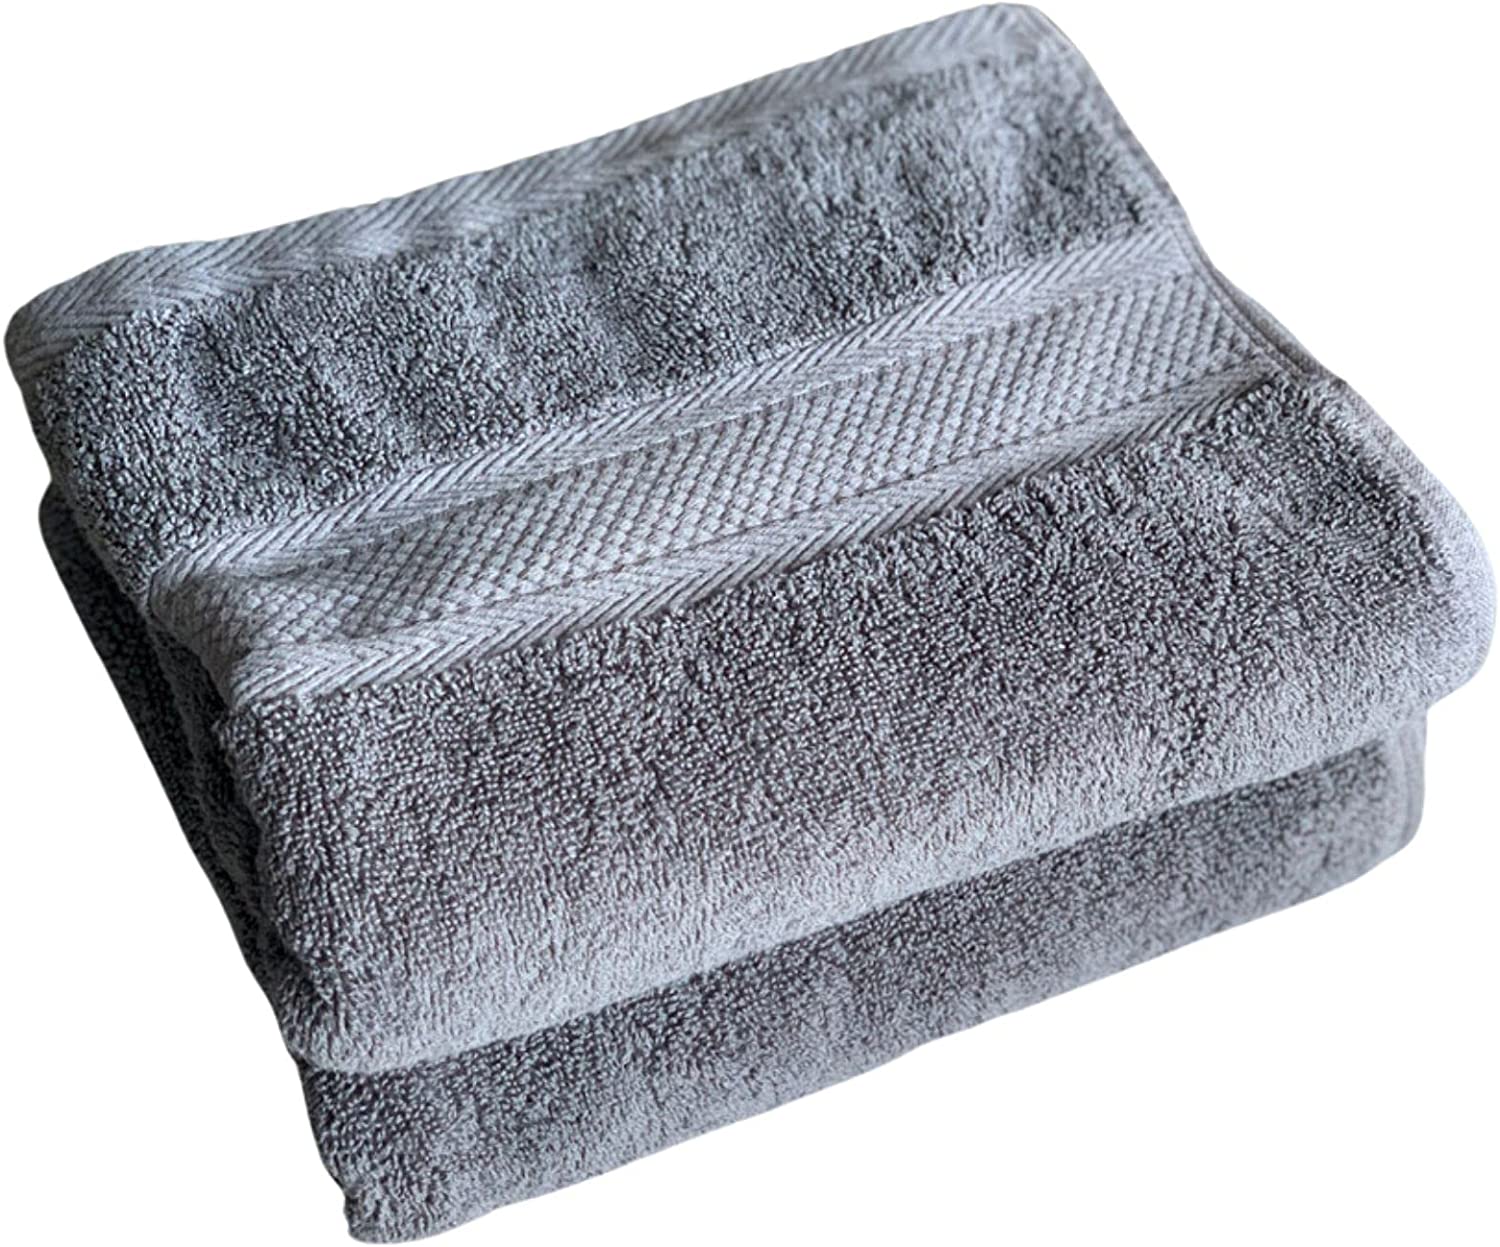 2 Large High Quality Hand Towels 